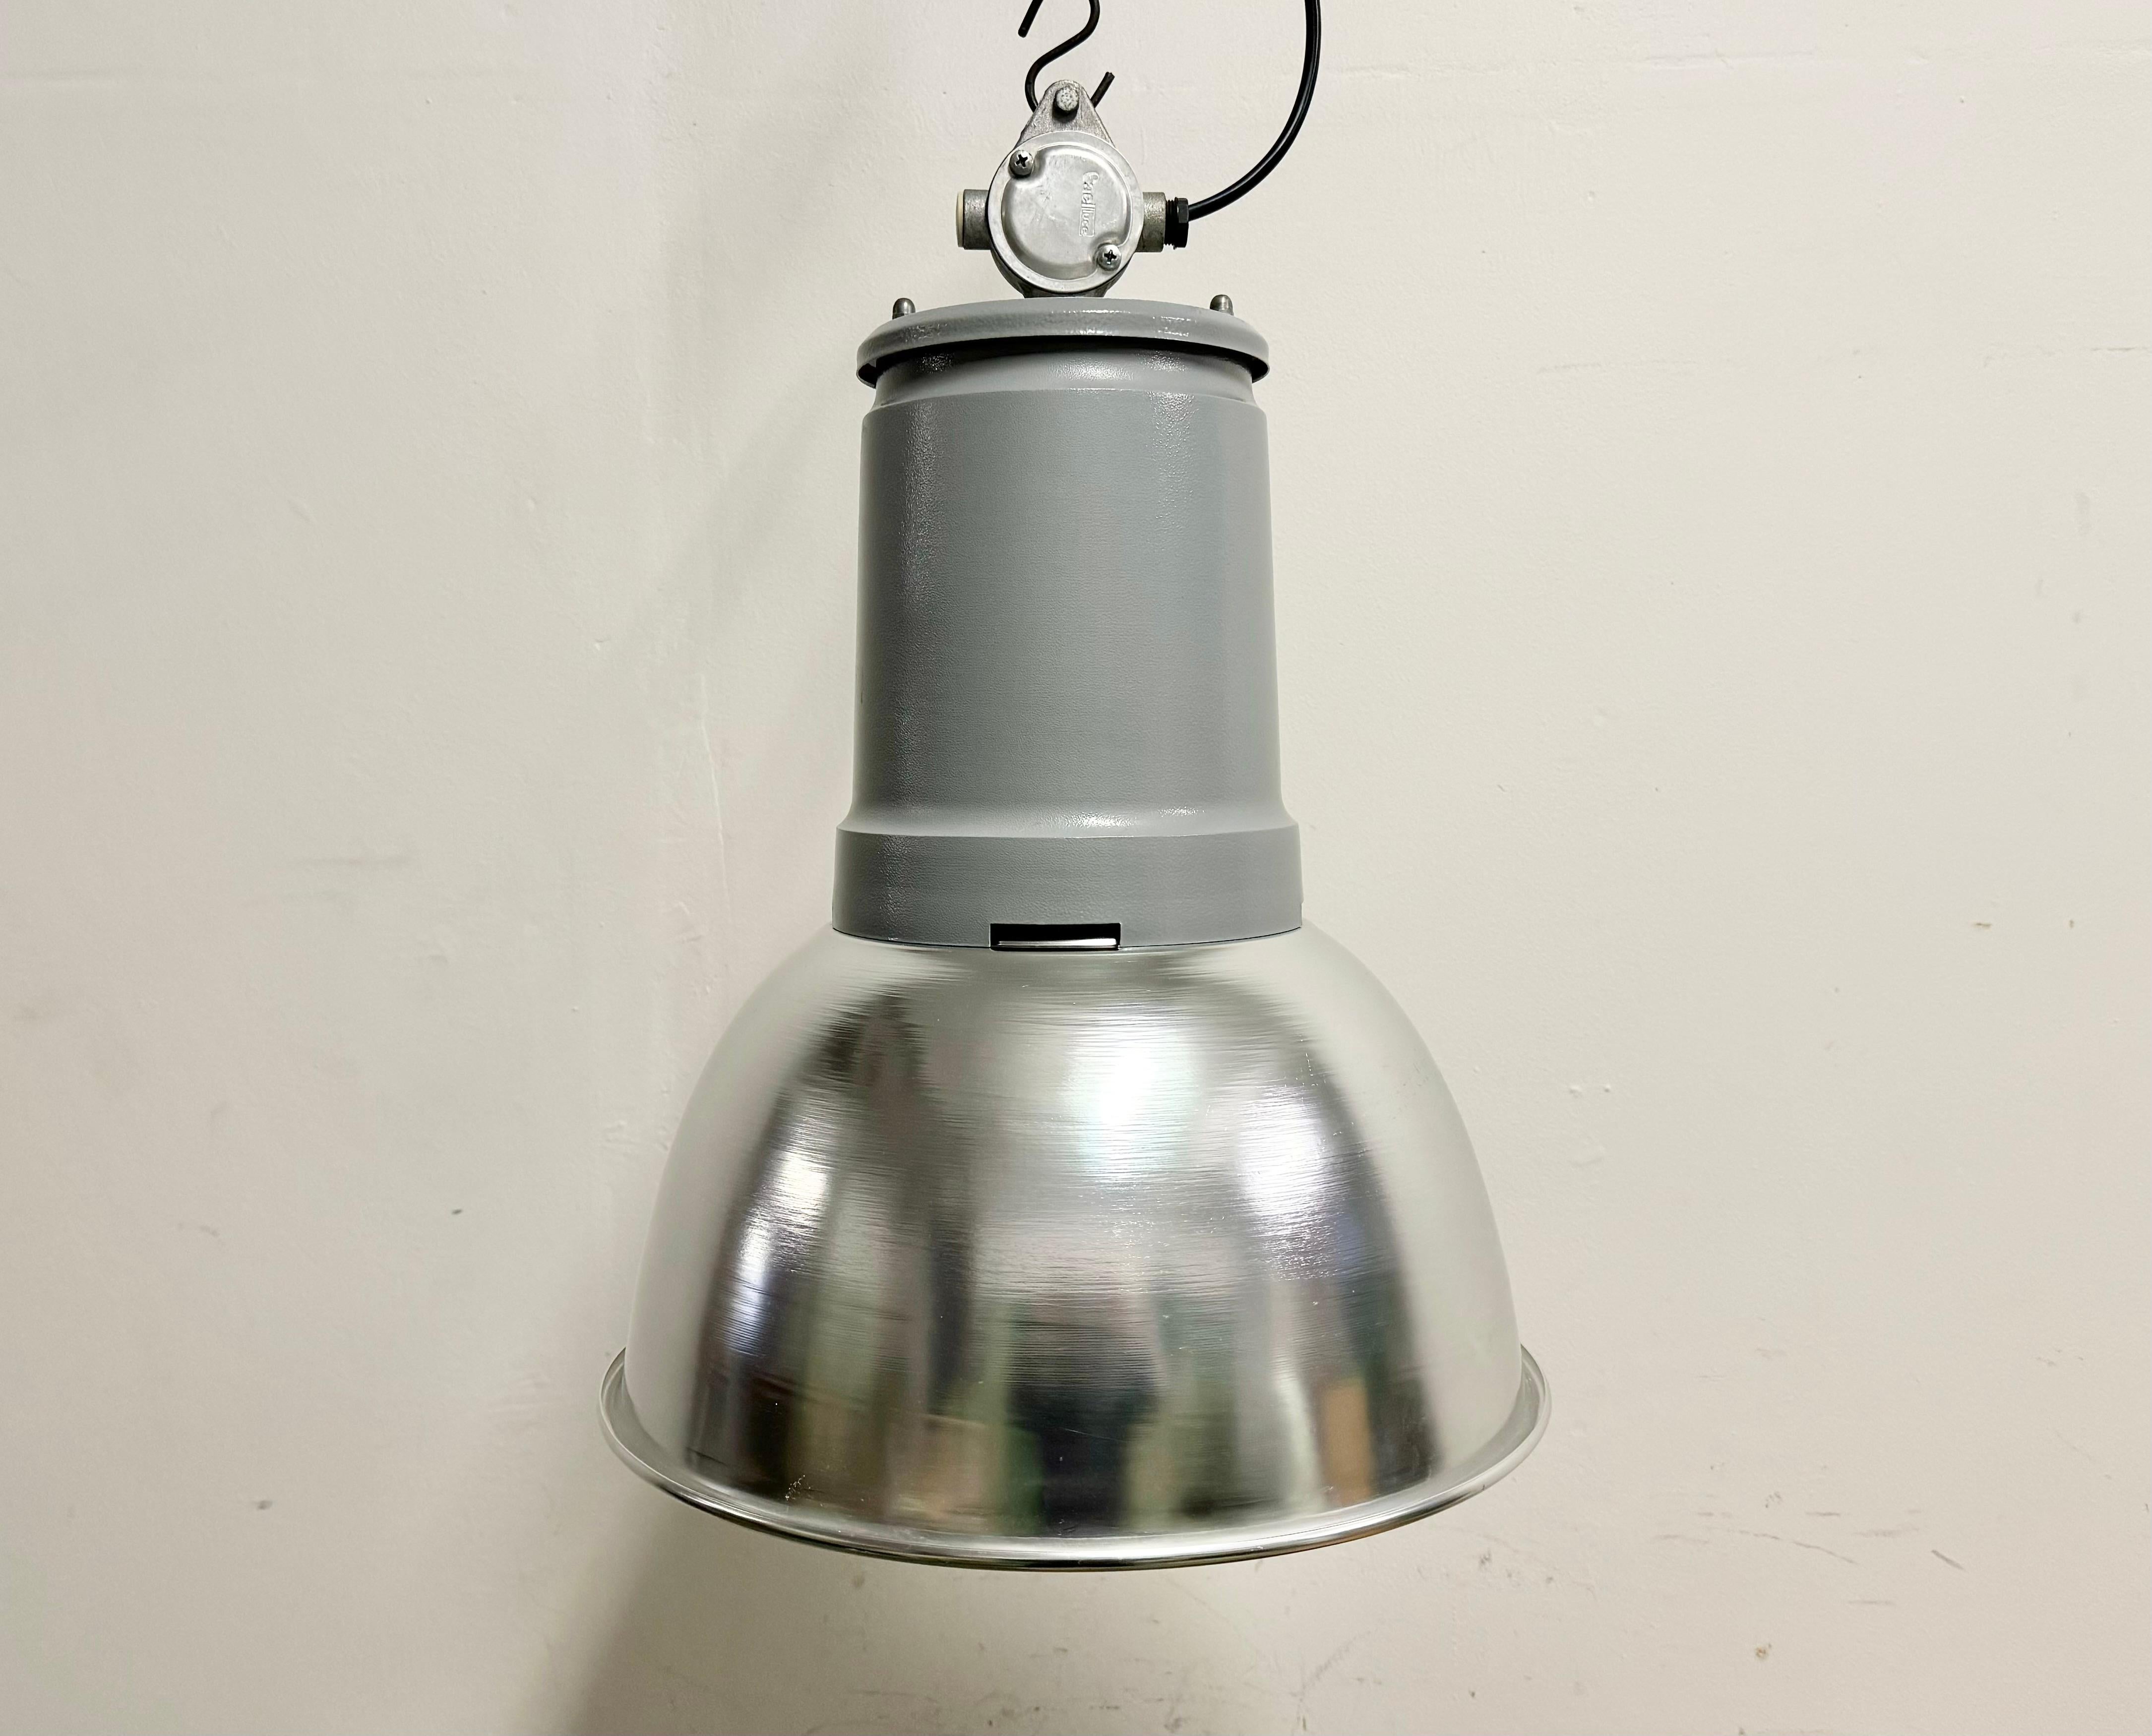 This pendant light was made by Fael Luce in Italy during the 1970s. The piece is comprised of an aluminium lampshade and an iron top with cast aluminium box. The lamp is fully functional and features a new porcelain E27/ E26 socket and wire. The